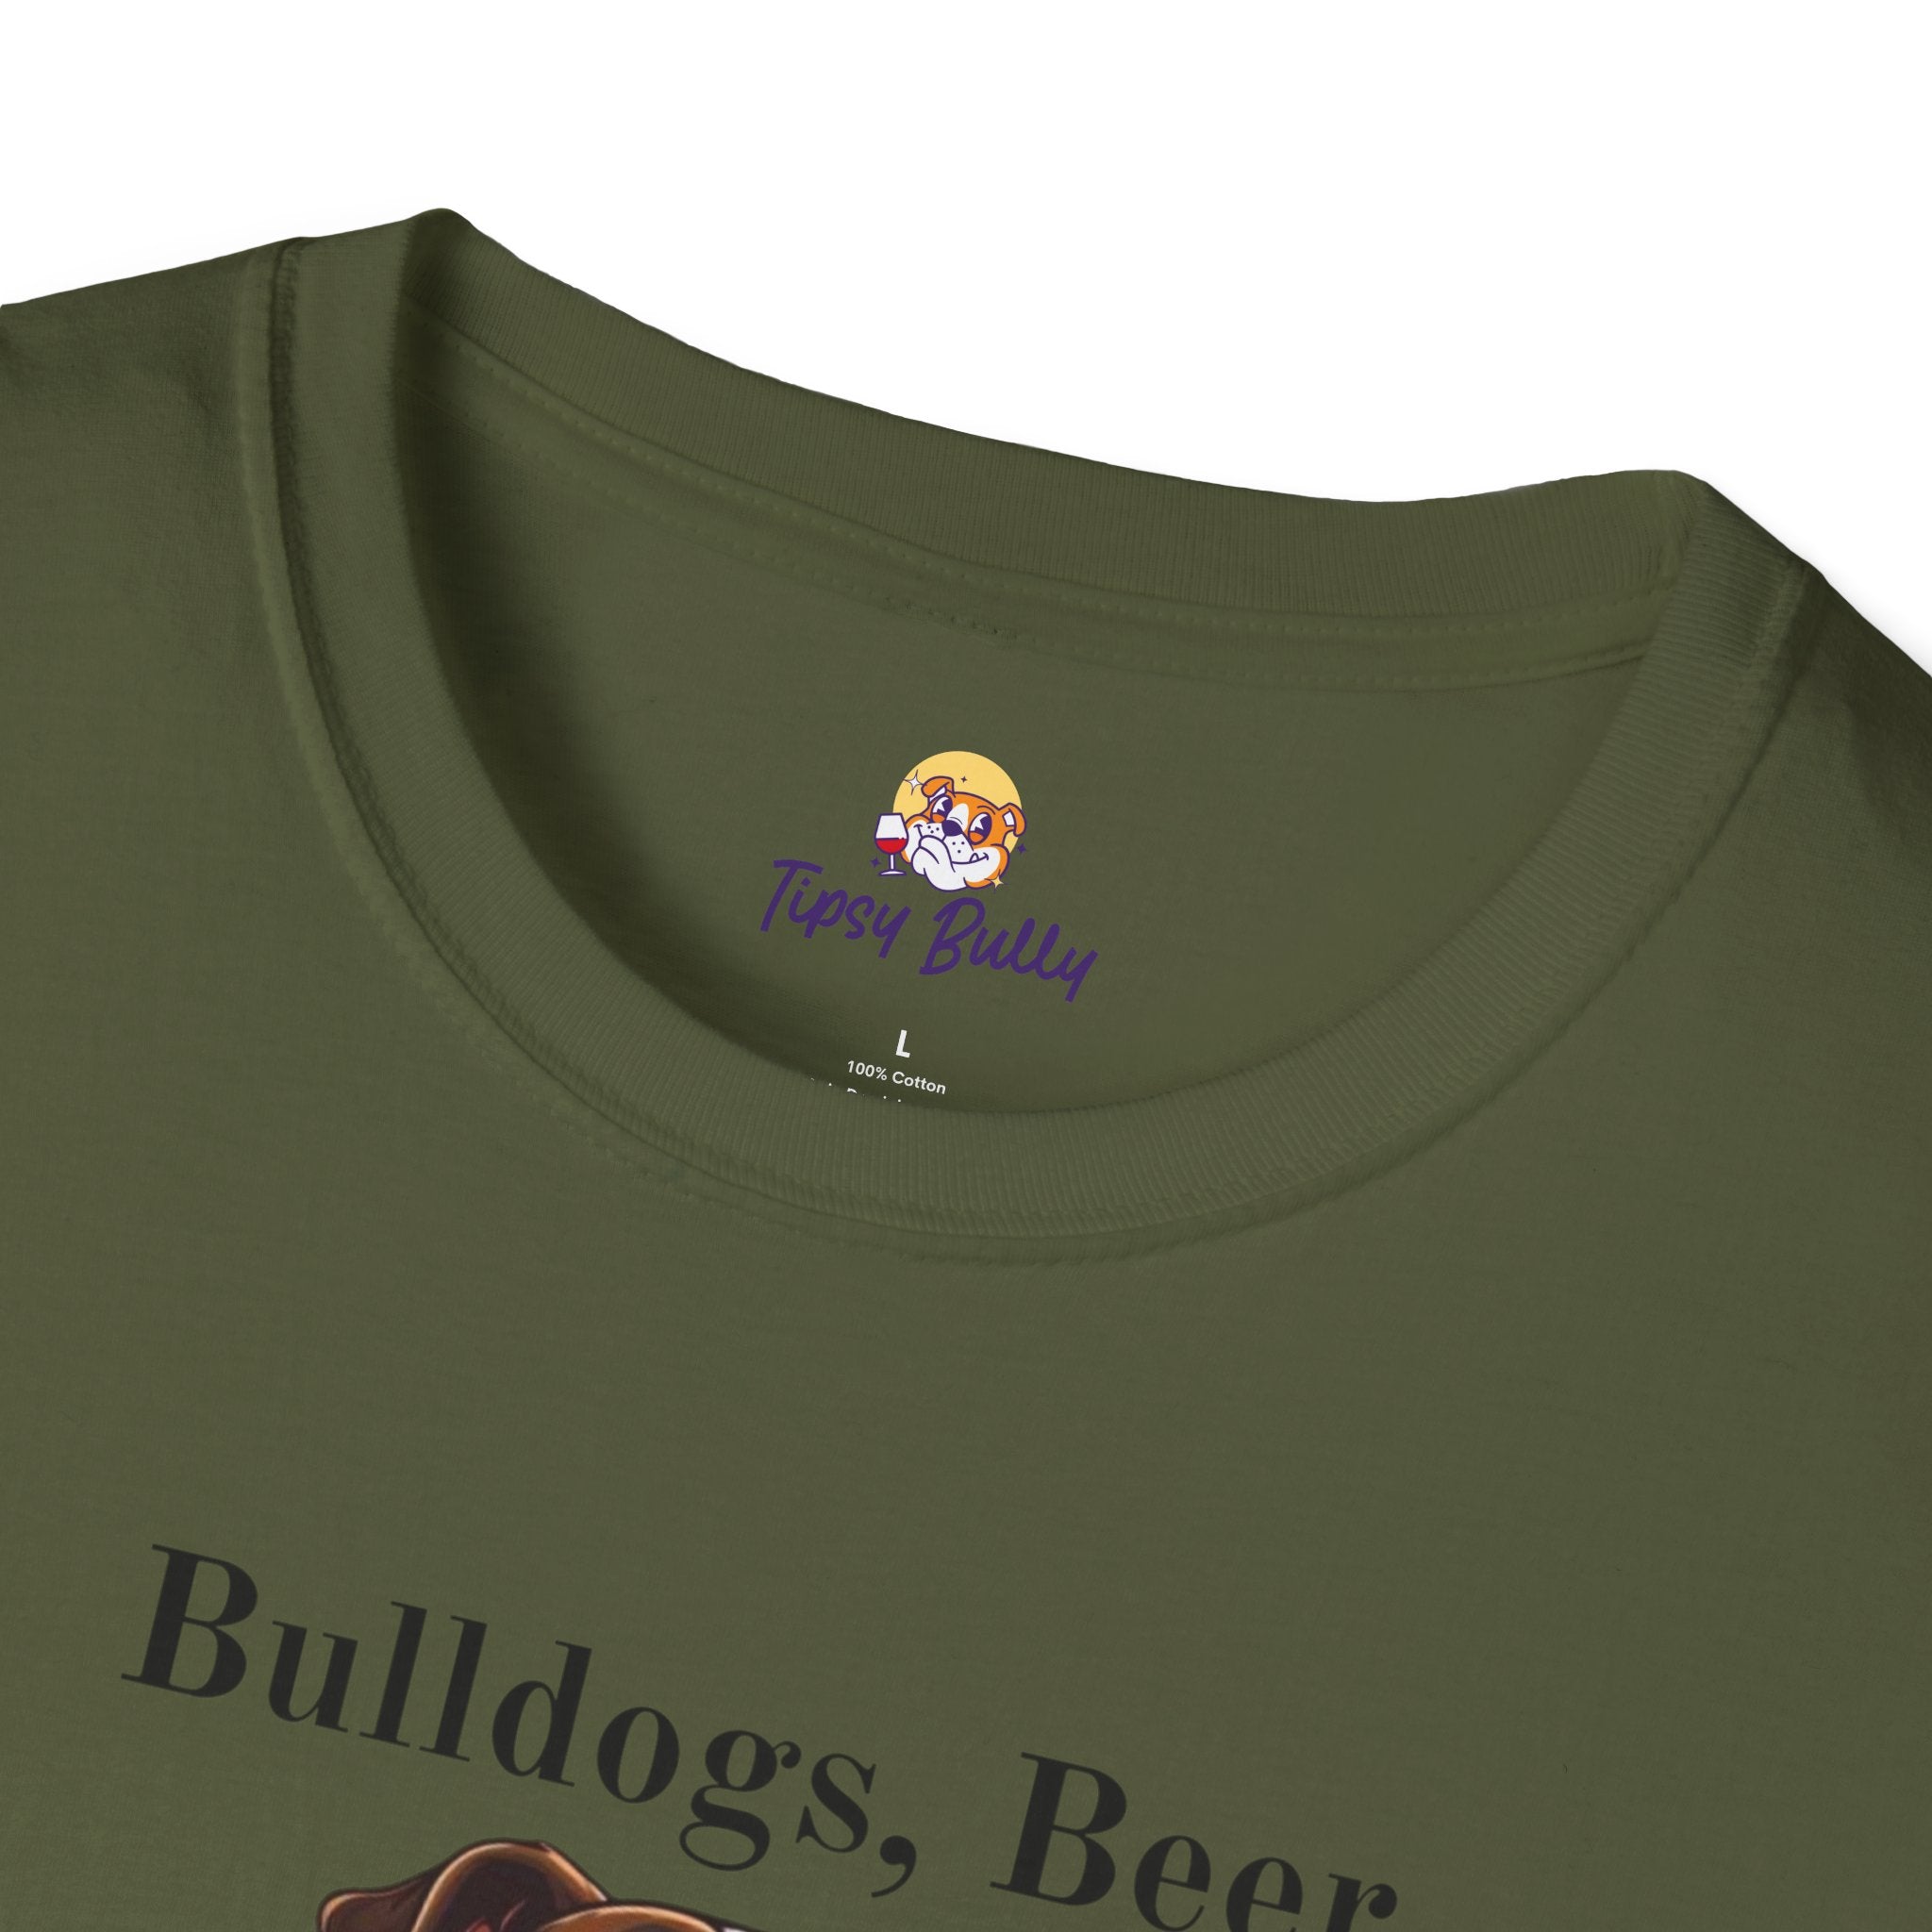 Bulldogs, Beer, and Bad Decisions" Unisex T-Shirt by Tipsy Bully (American/Brown)